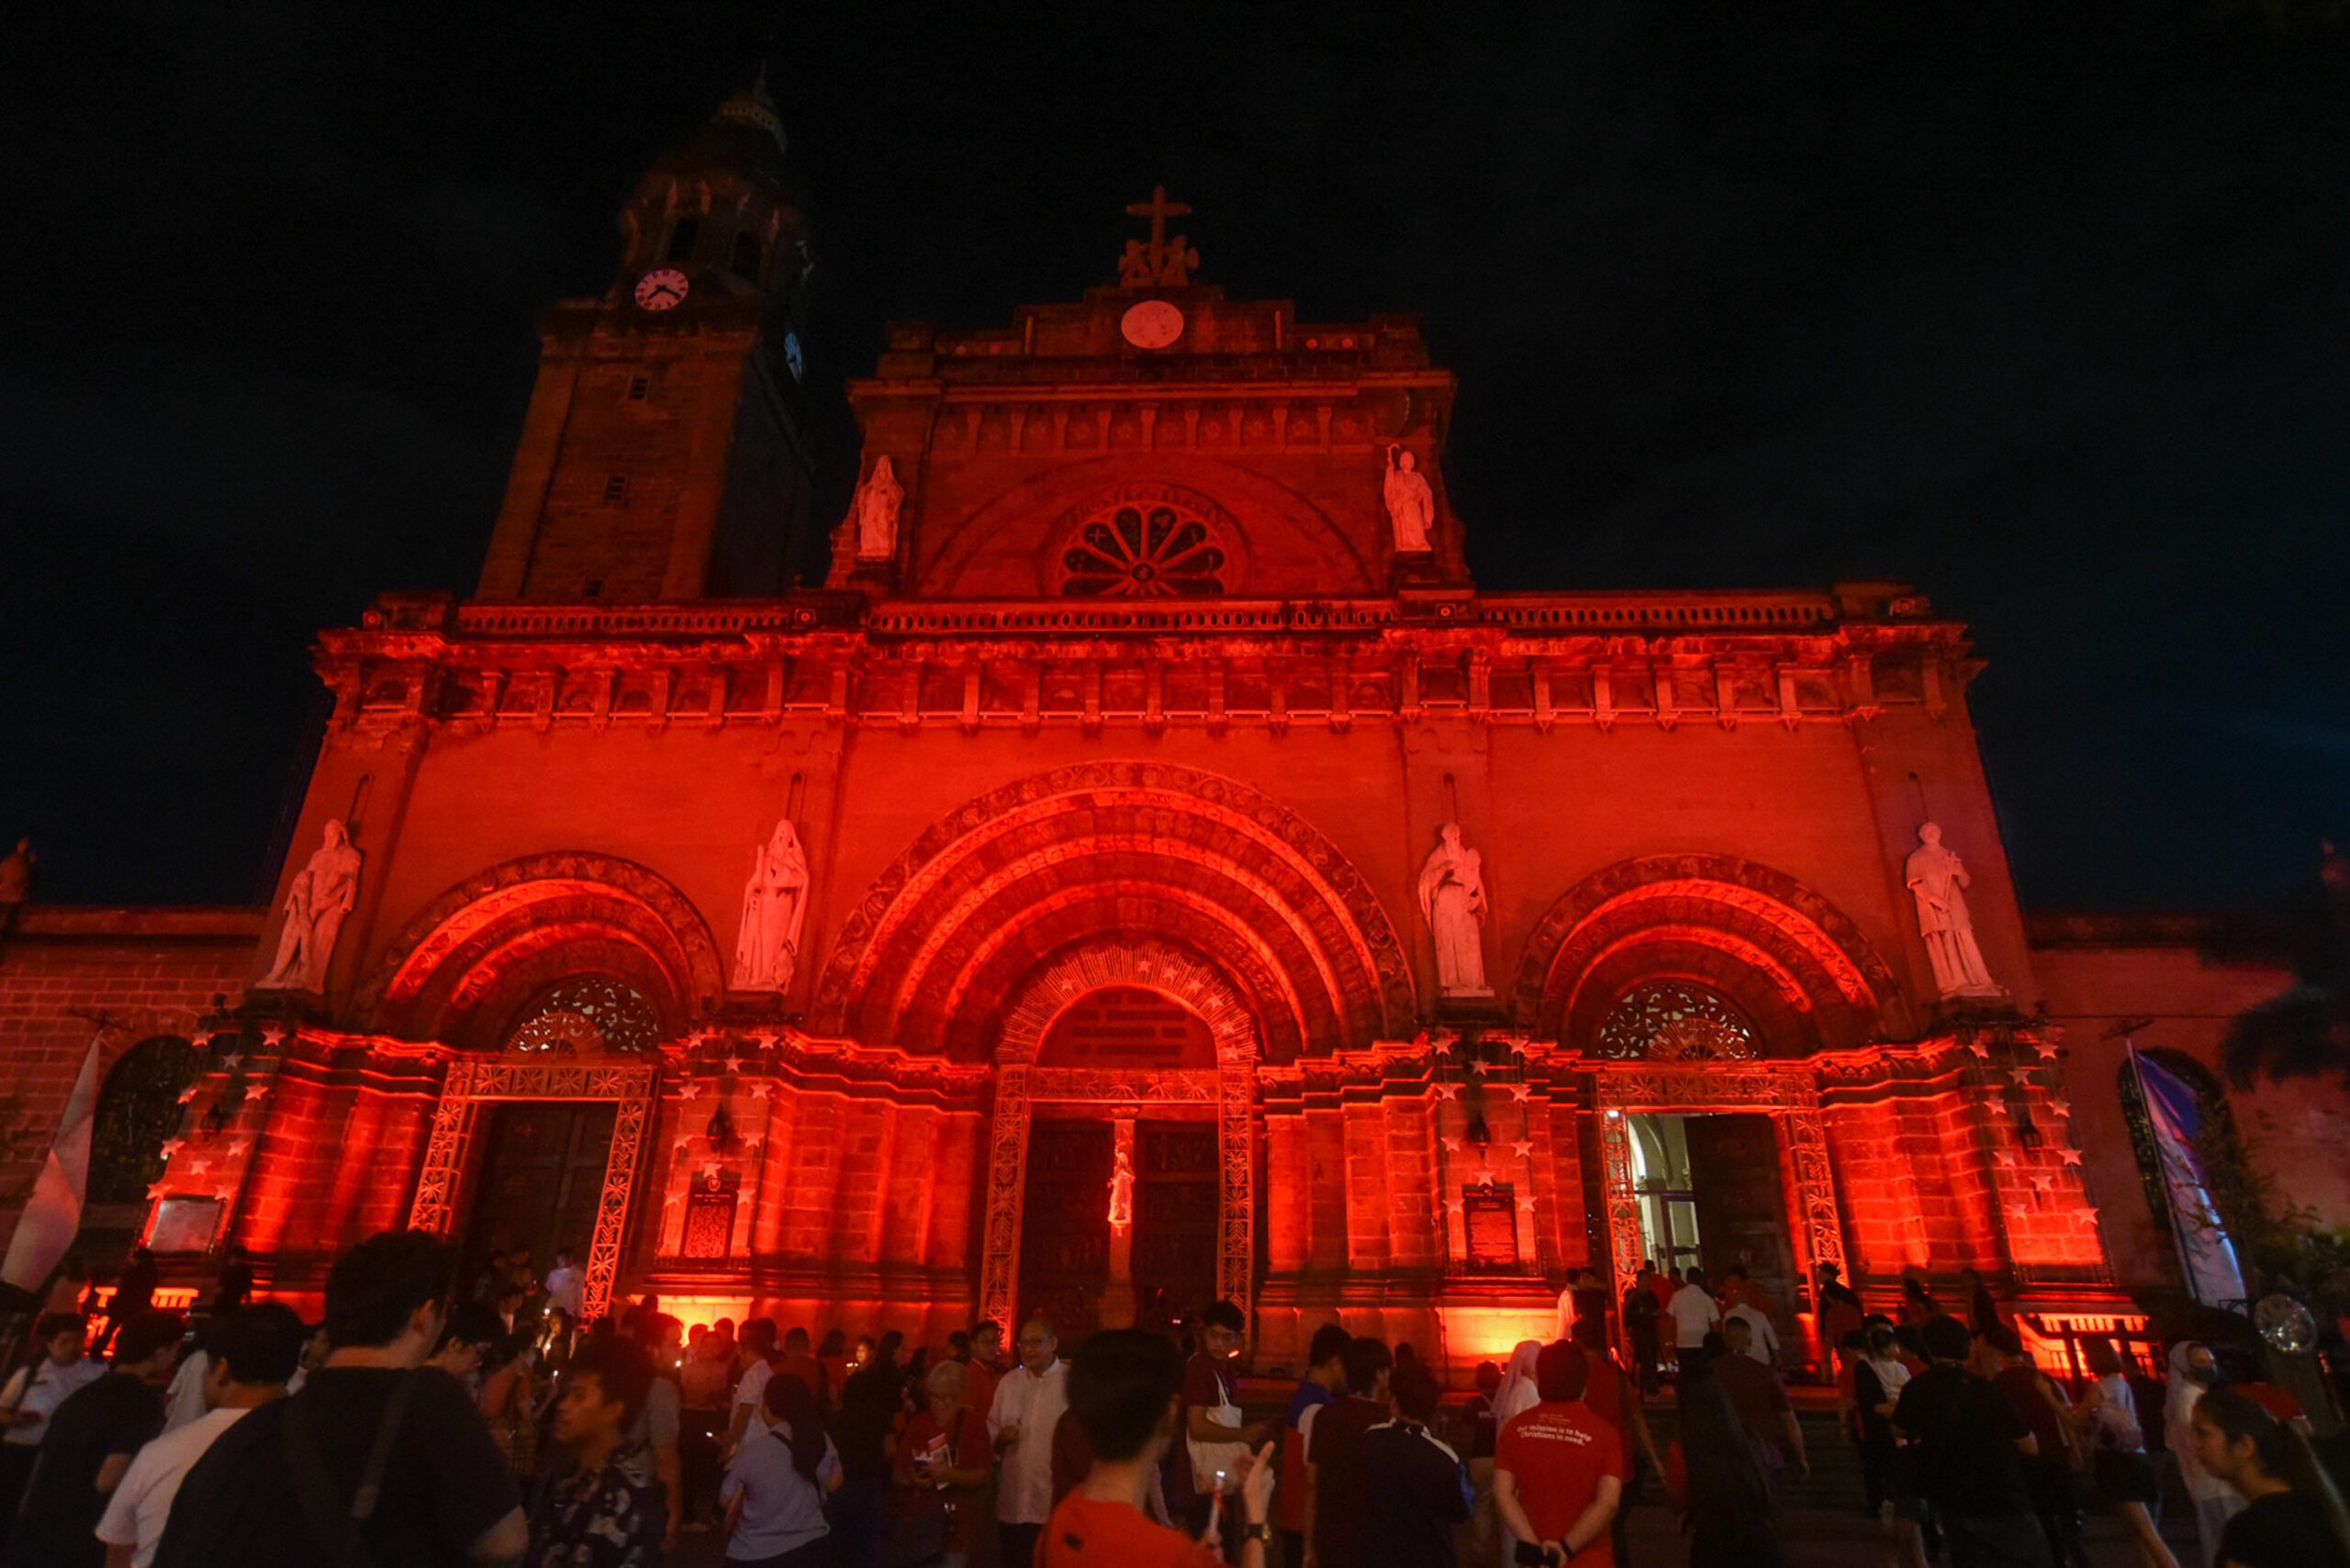 Churches turn bloody red to honor ‘our persecuted brothers and sisters’